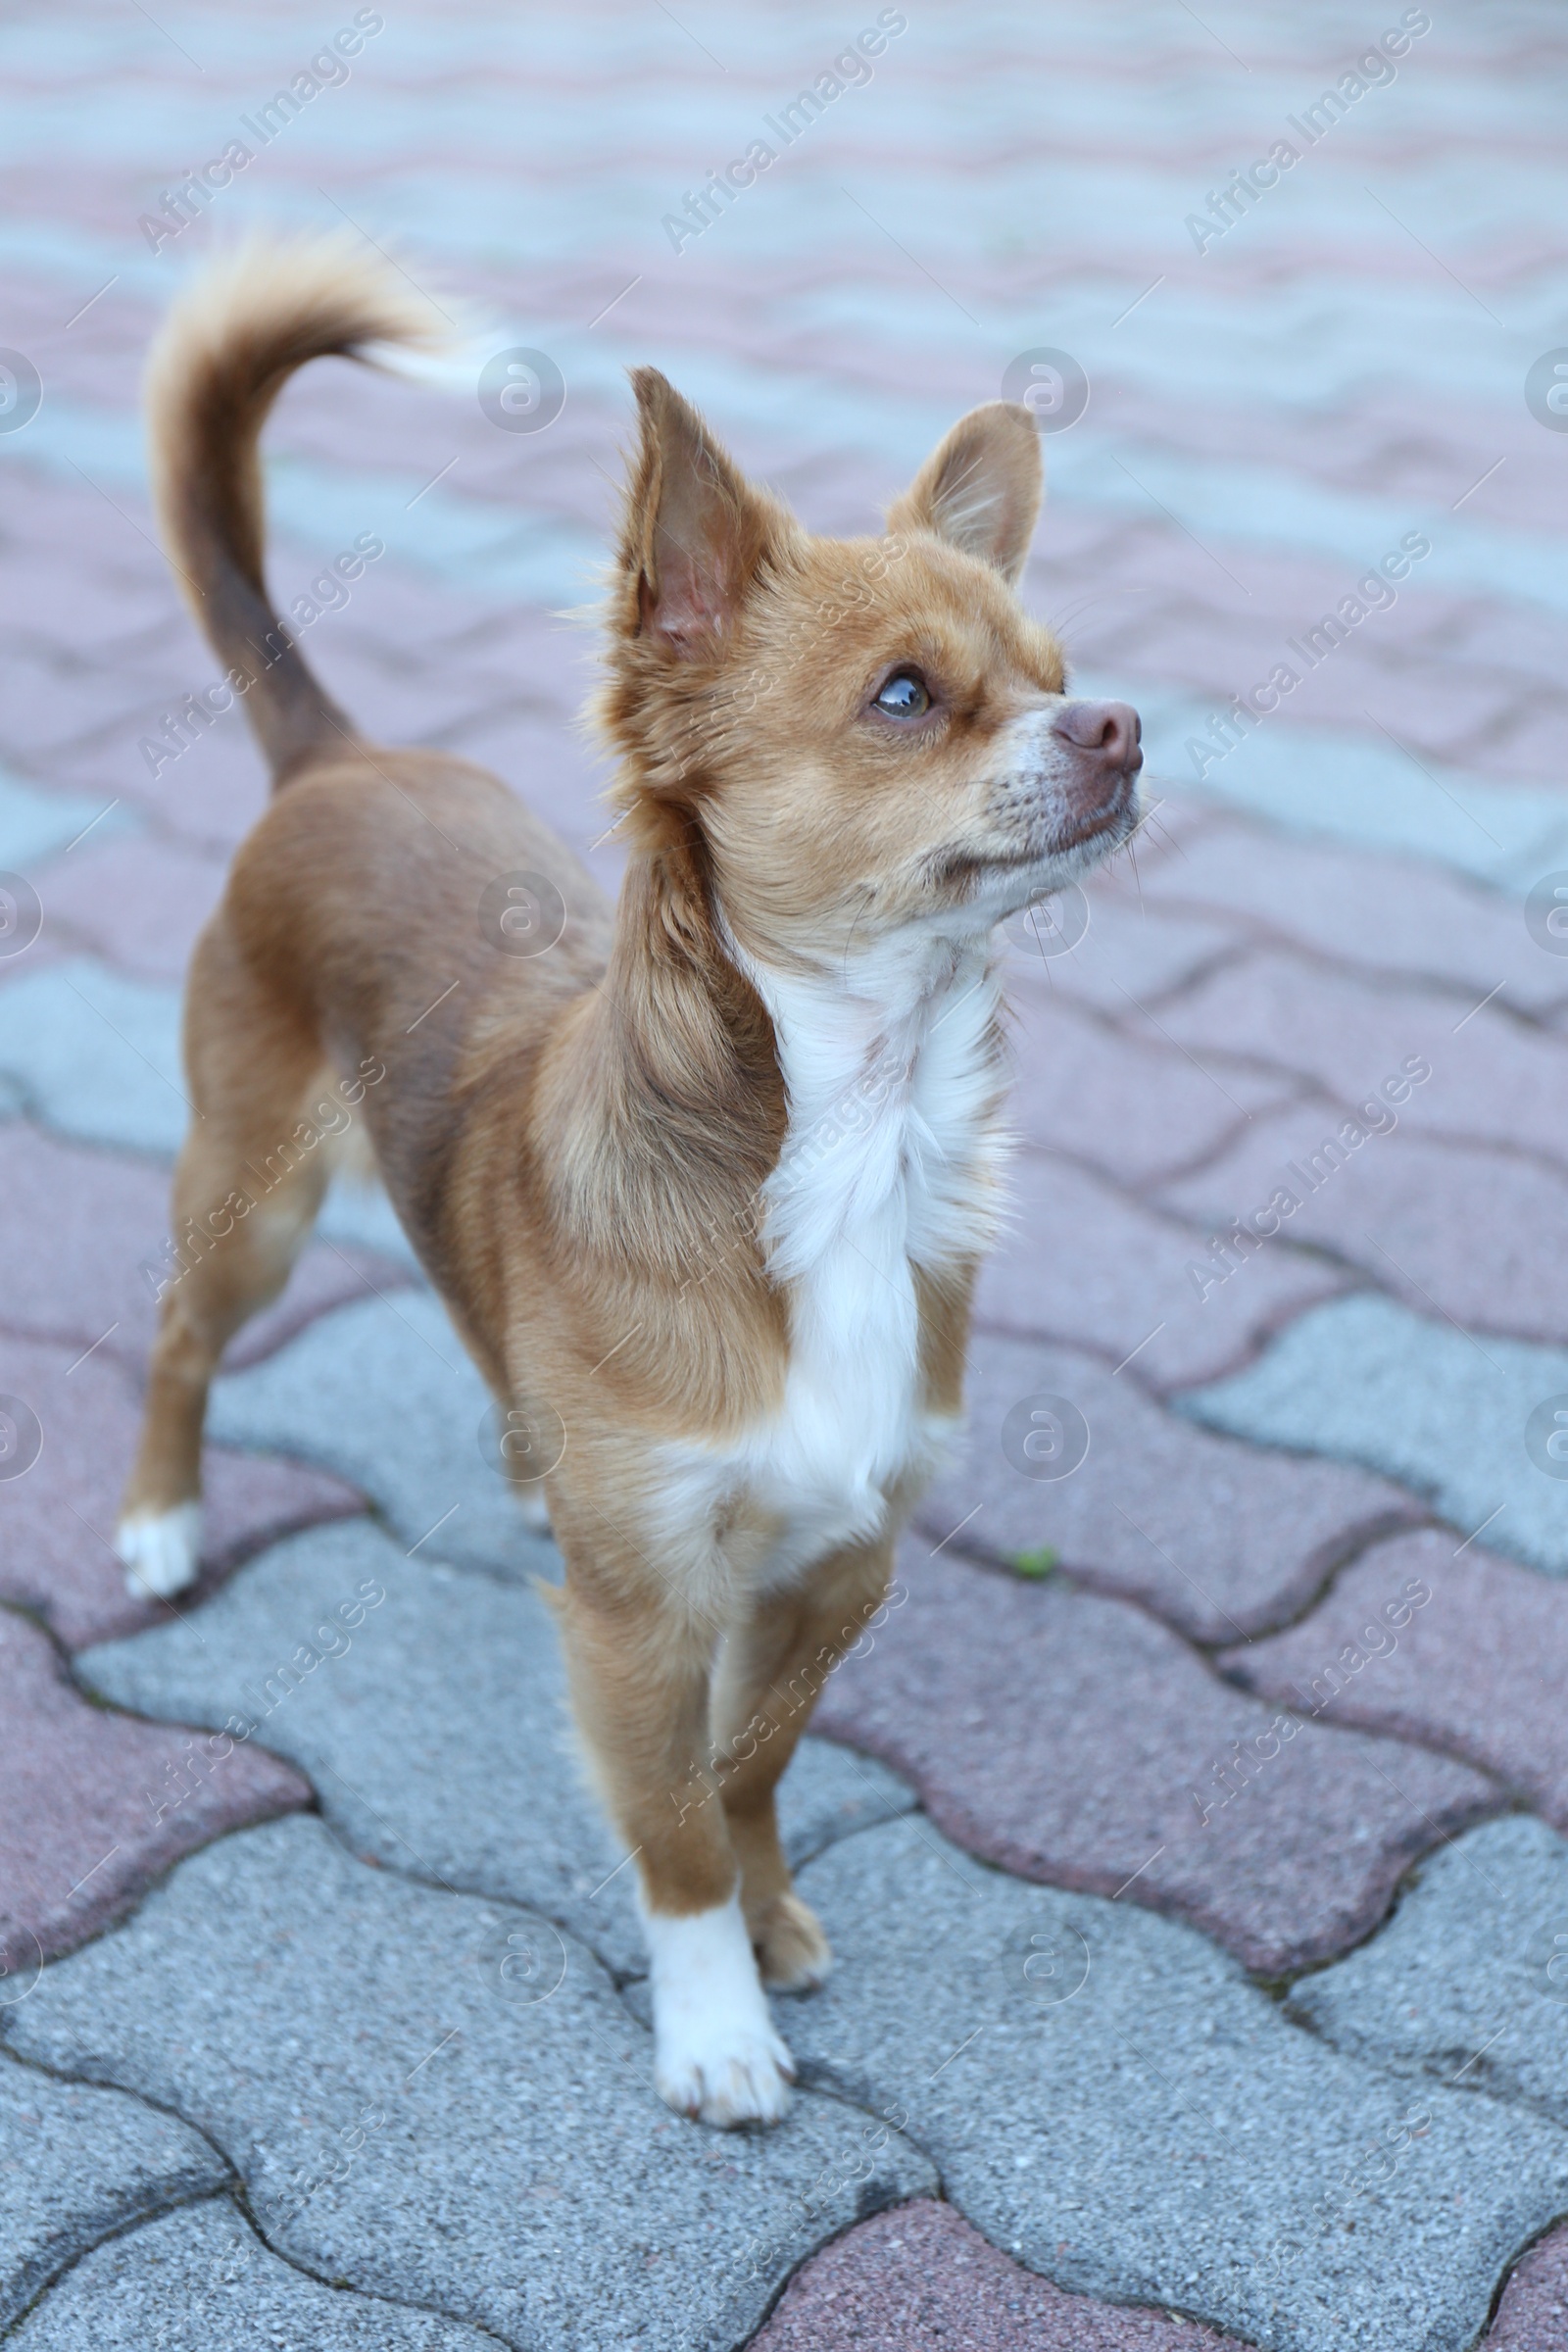 Photo of Cute dog with brown hair walking outdoors